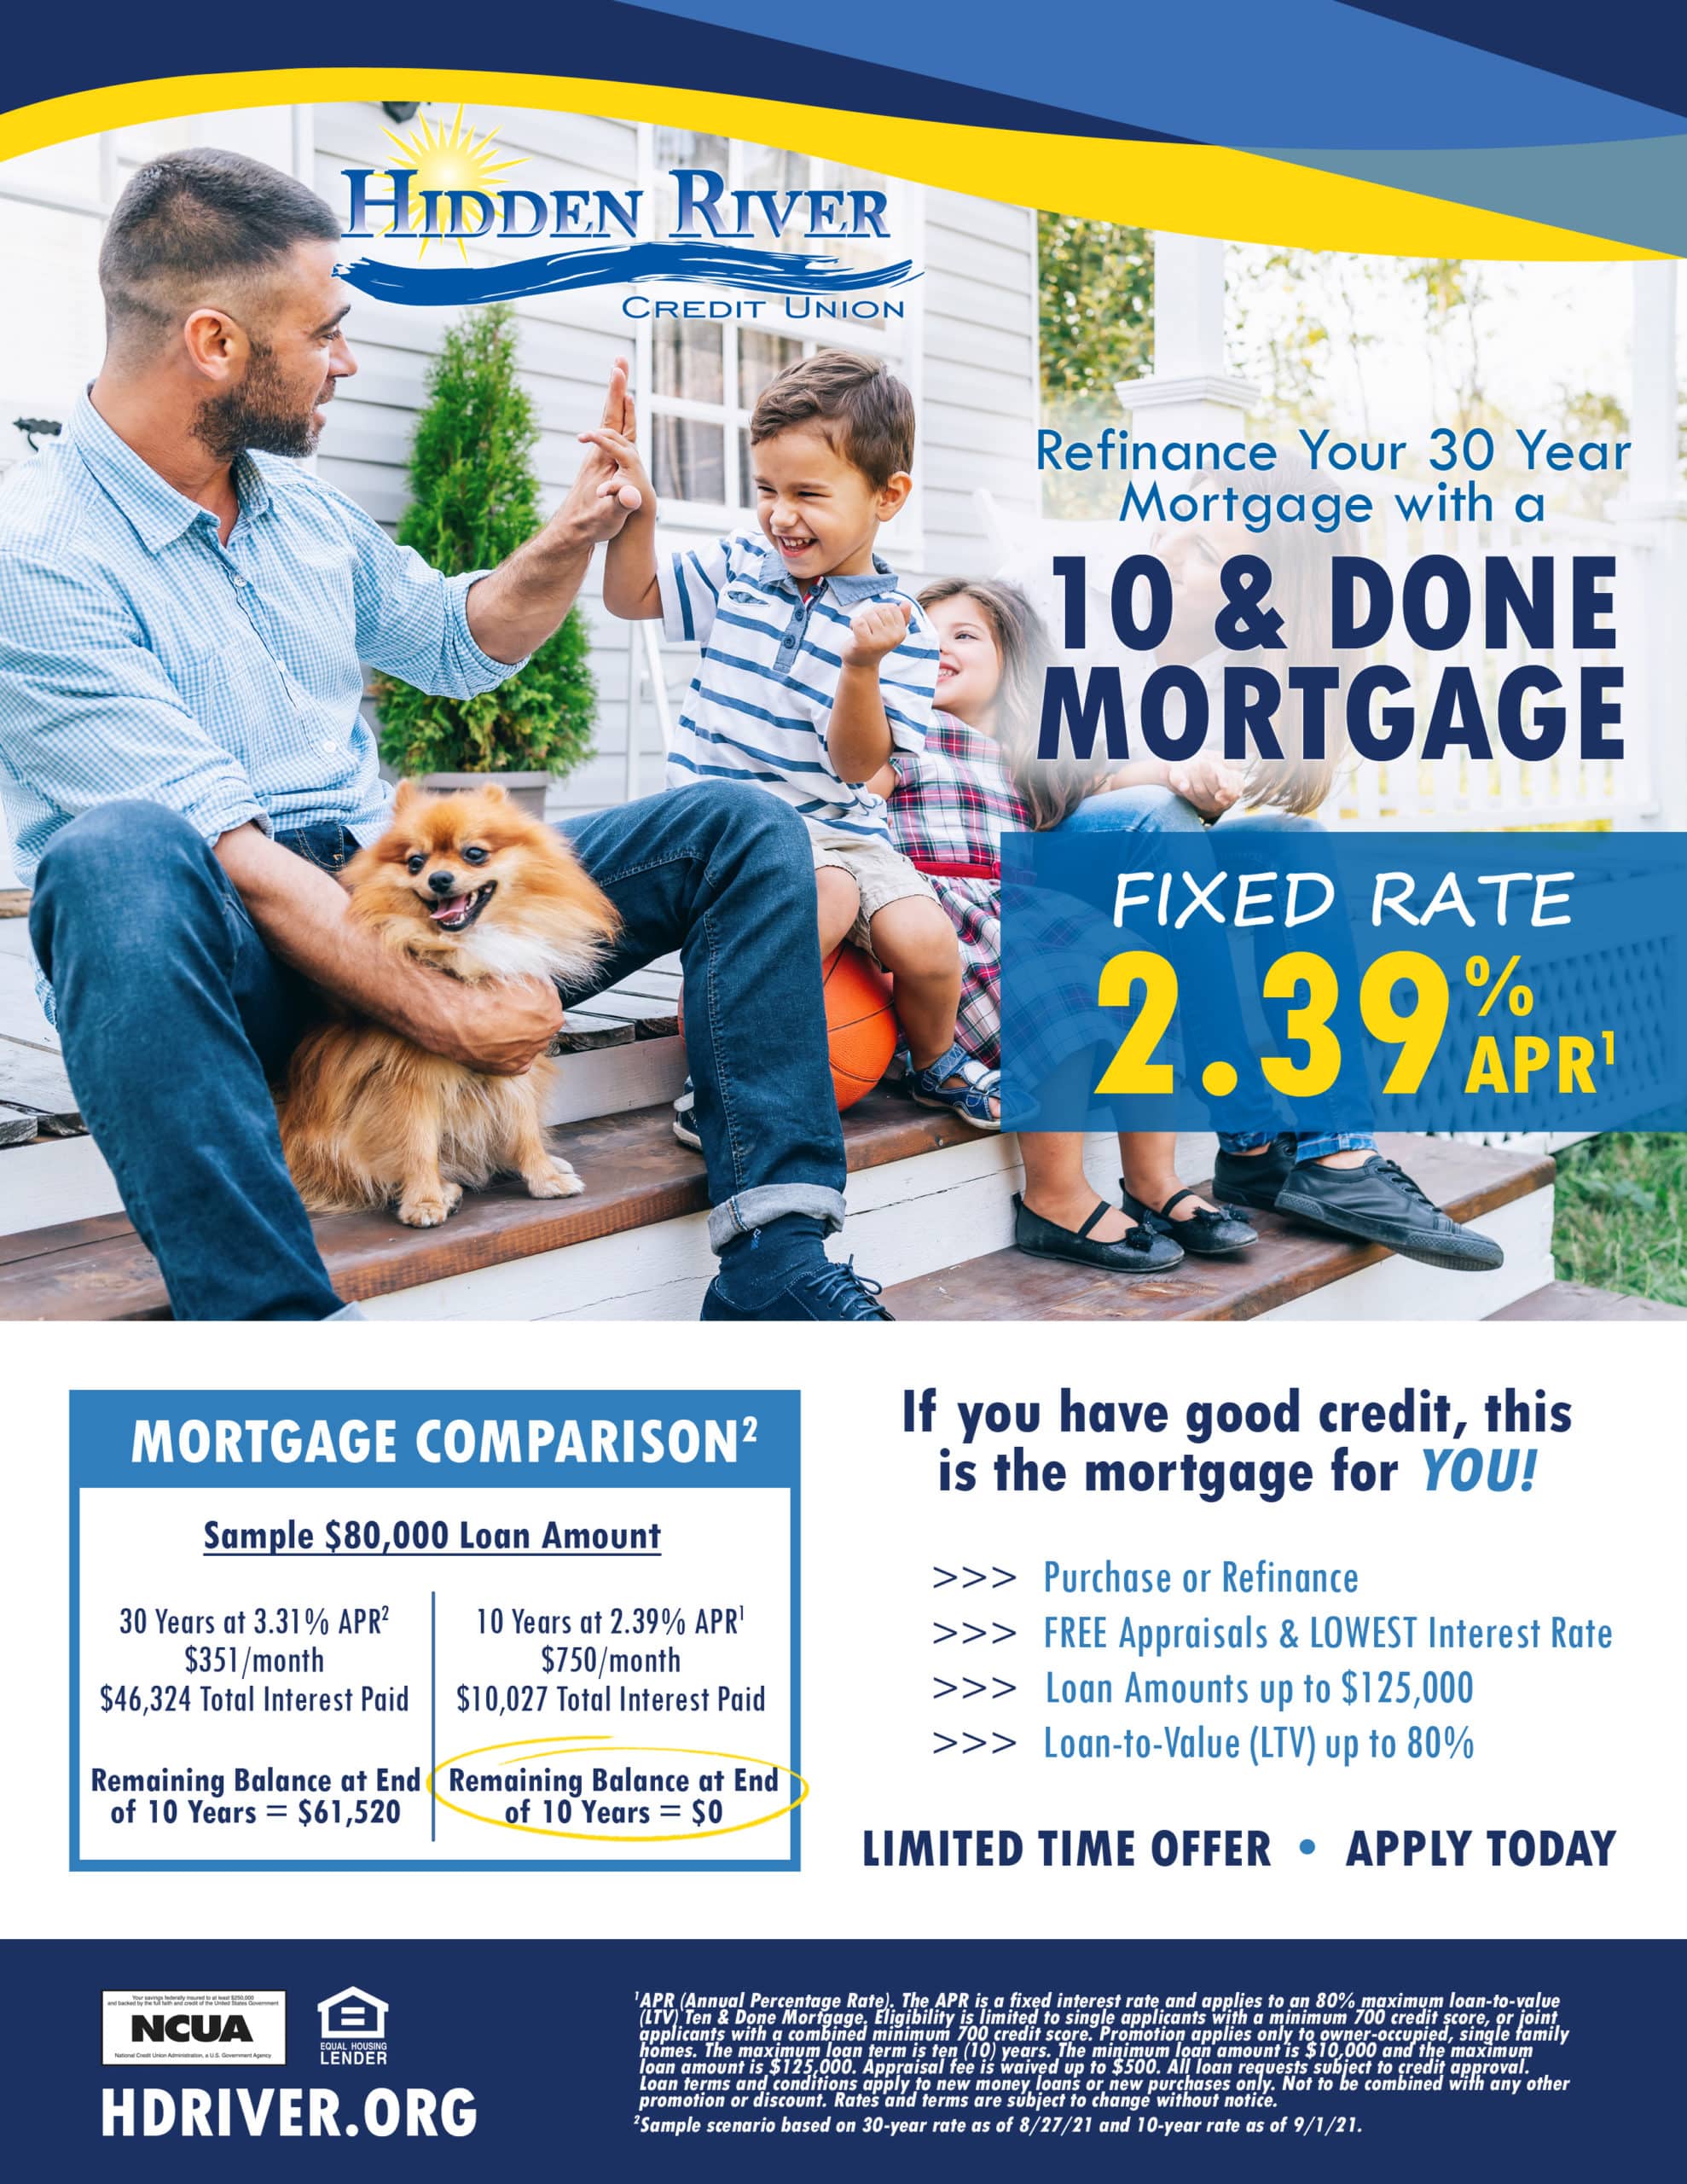 Family sitting on front porch of house and dad is high-fiving his excited son with phrase - It's what you've been waiting for... 10 & Done Mortgages. Fixed Rate 2.39% APR. You've always been financially responsible, why not benefit from your excellent credit? FREE Appraisals & LOWEST Interest Rate. Loan Amounts up to $125,000. Loan-to-Value (LTV) up to 80%. Minimum 700 Credit Score. Limited Time Offer - Apply Today!